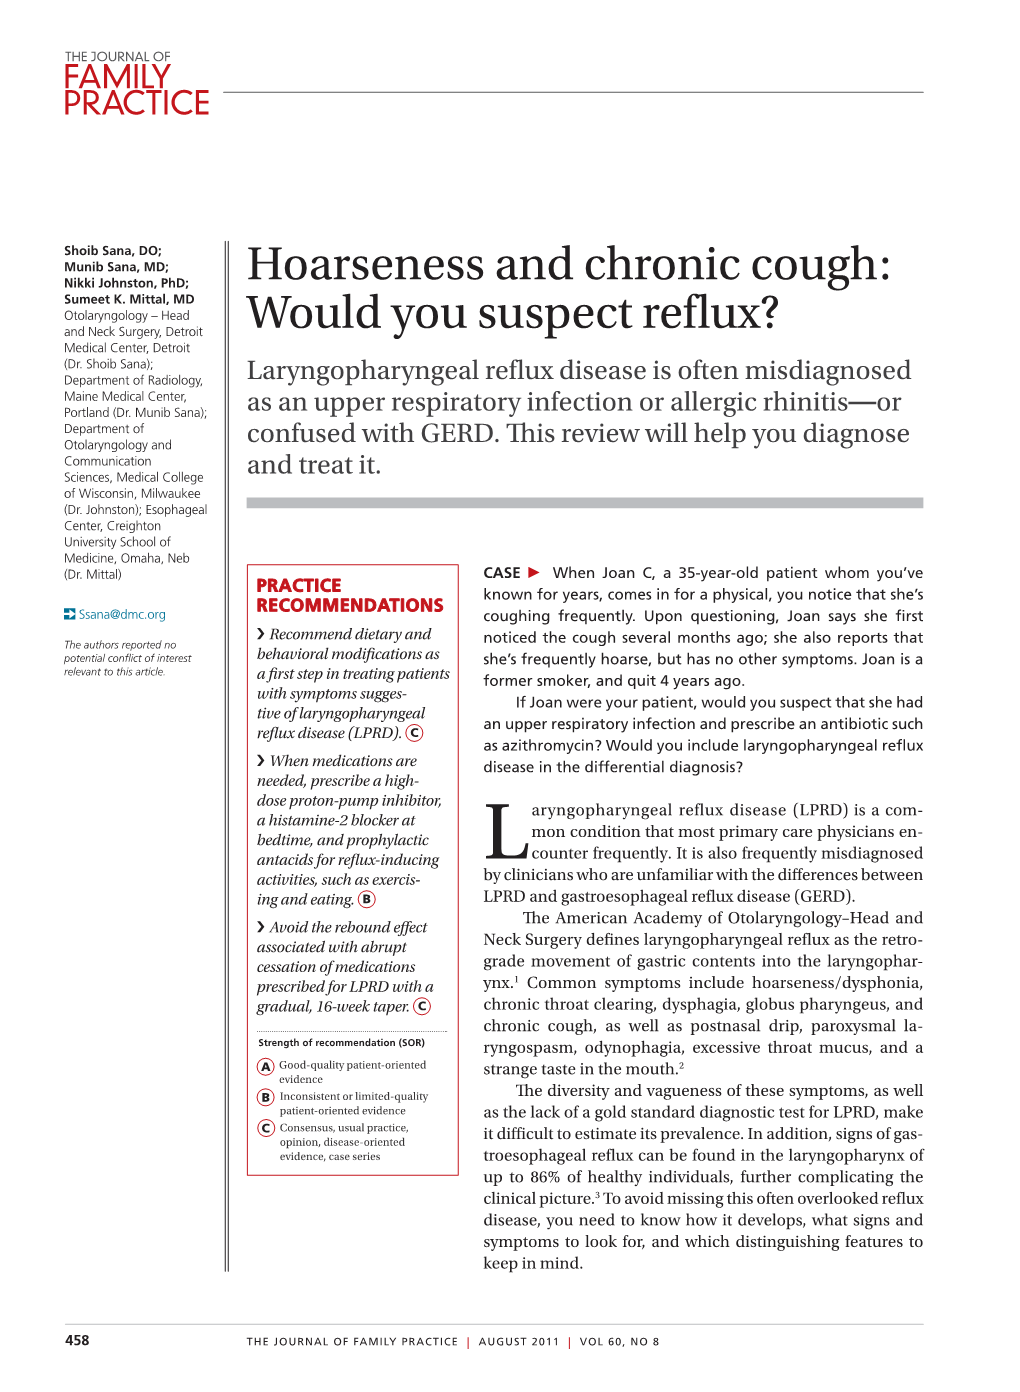 Hoarseness and Chronic Cough: Sumeet K